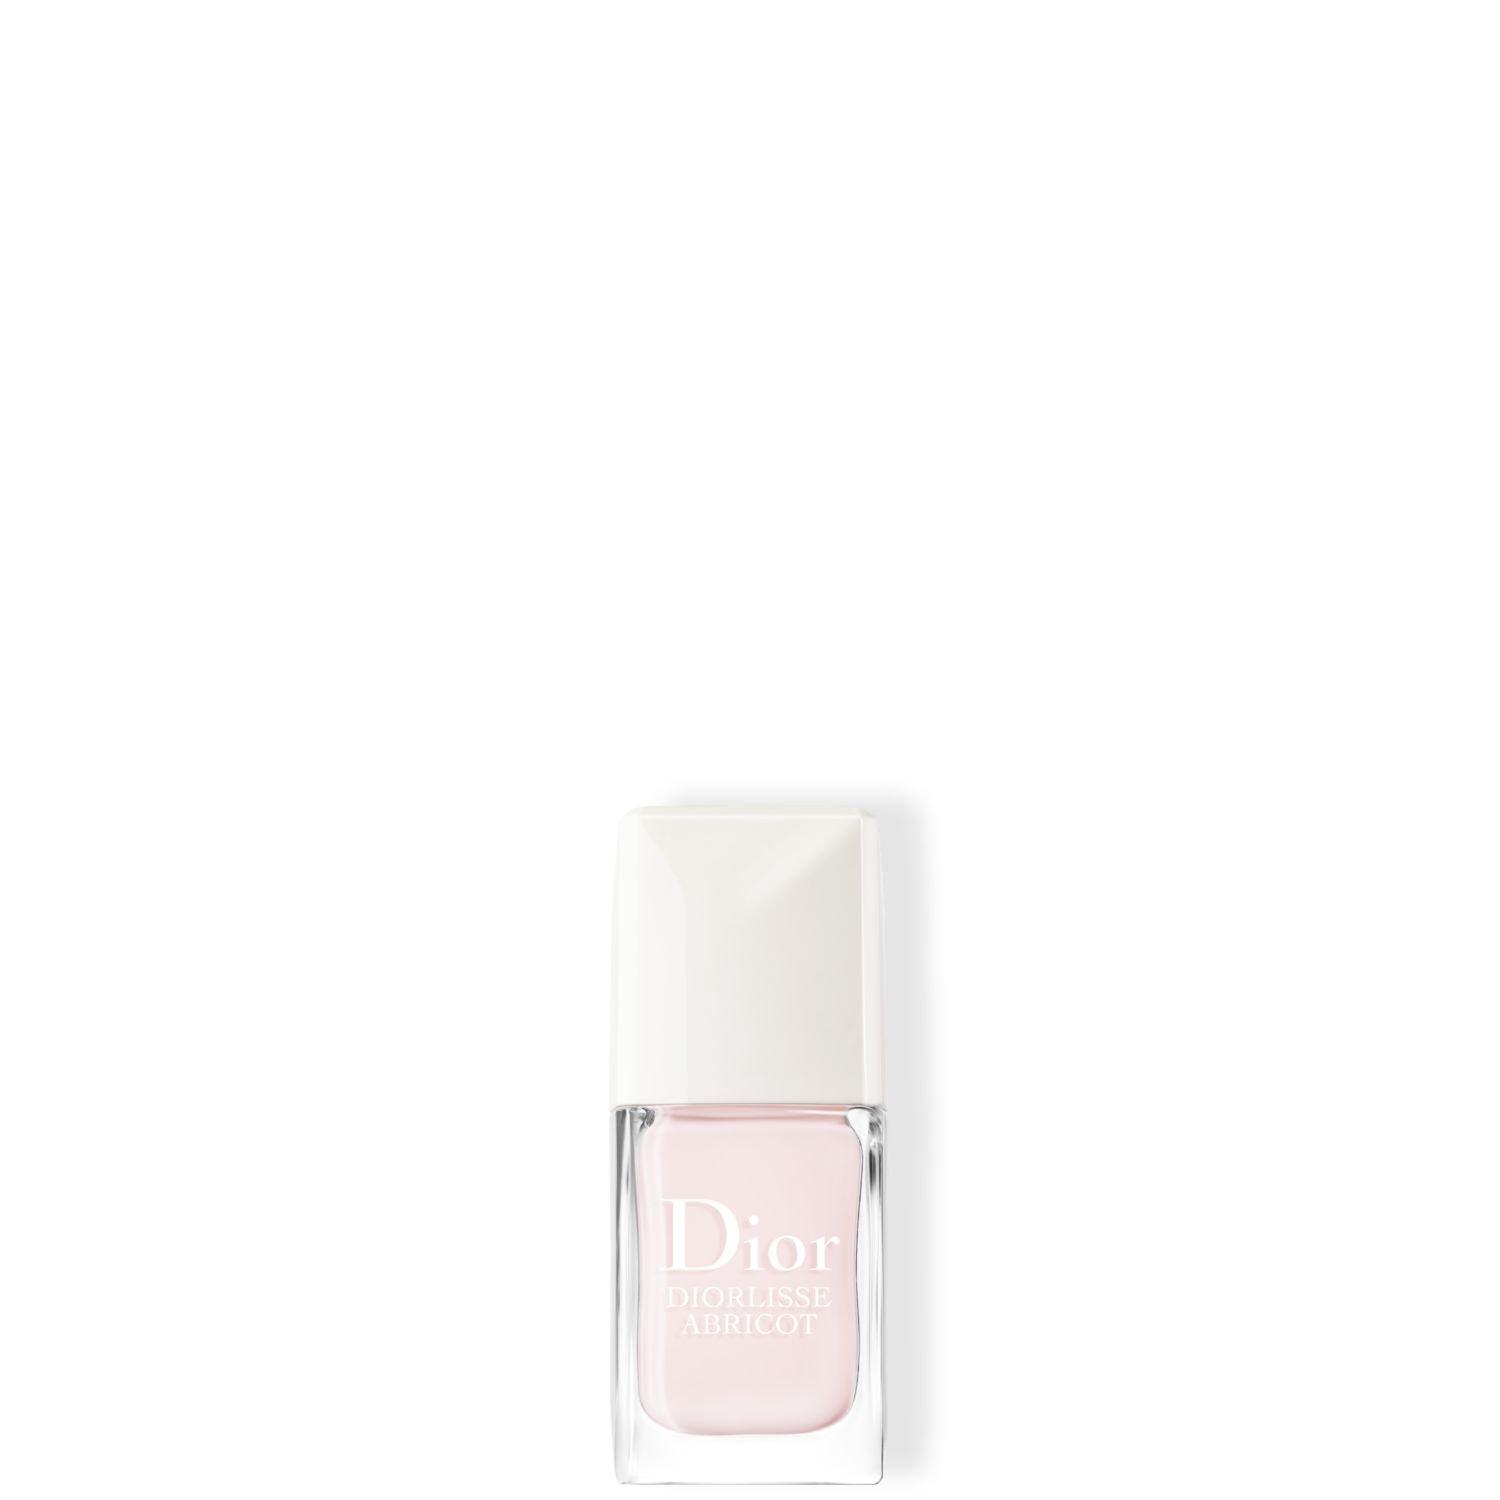 Image of Dior Basic Products MANUCURE - 10ml